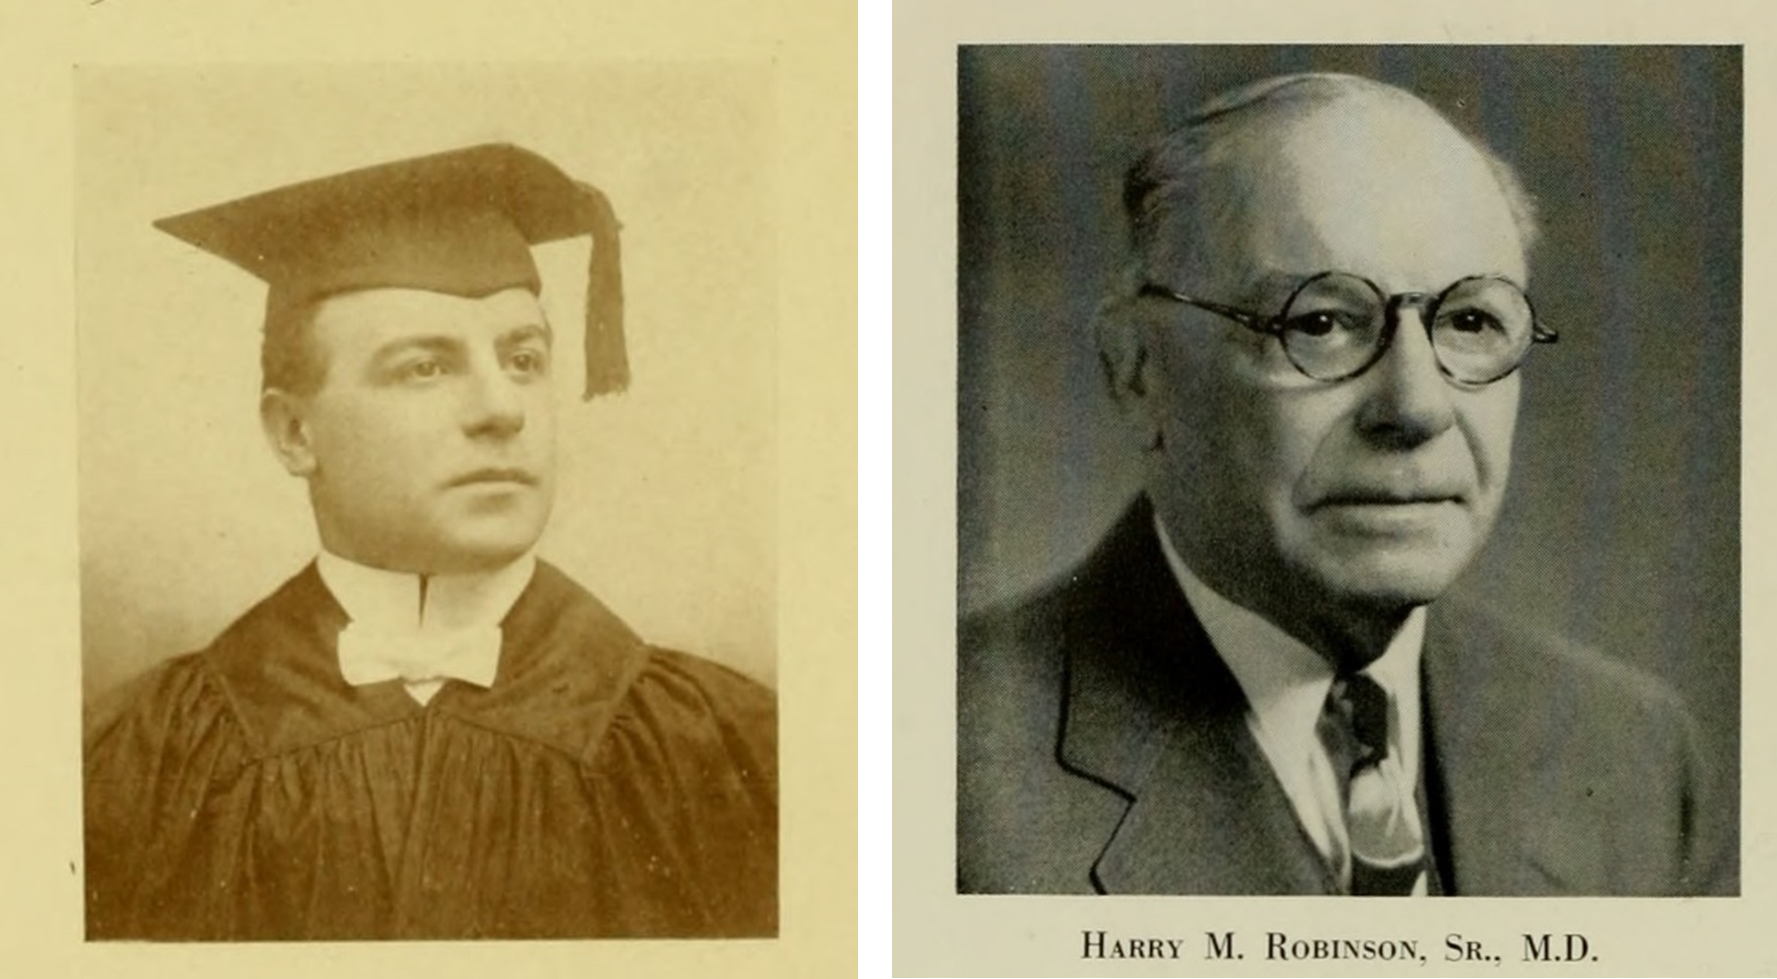 Two photographs, left photograph is a young man in a cap and gown, right photograph is an older man wearing a suit and tie and glasses.